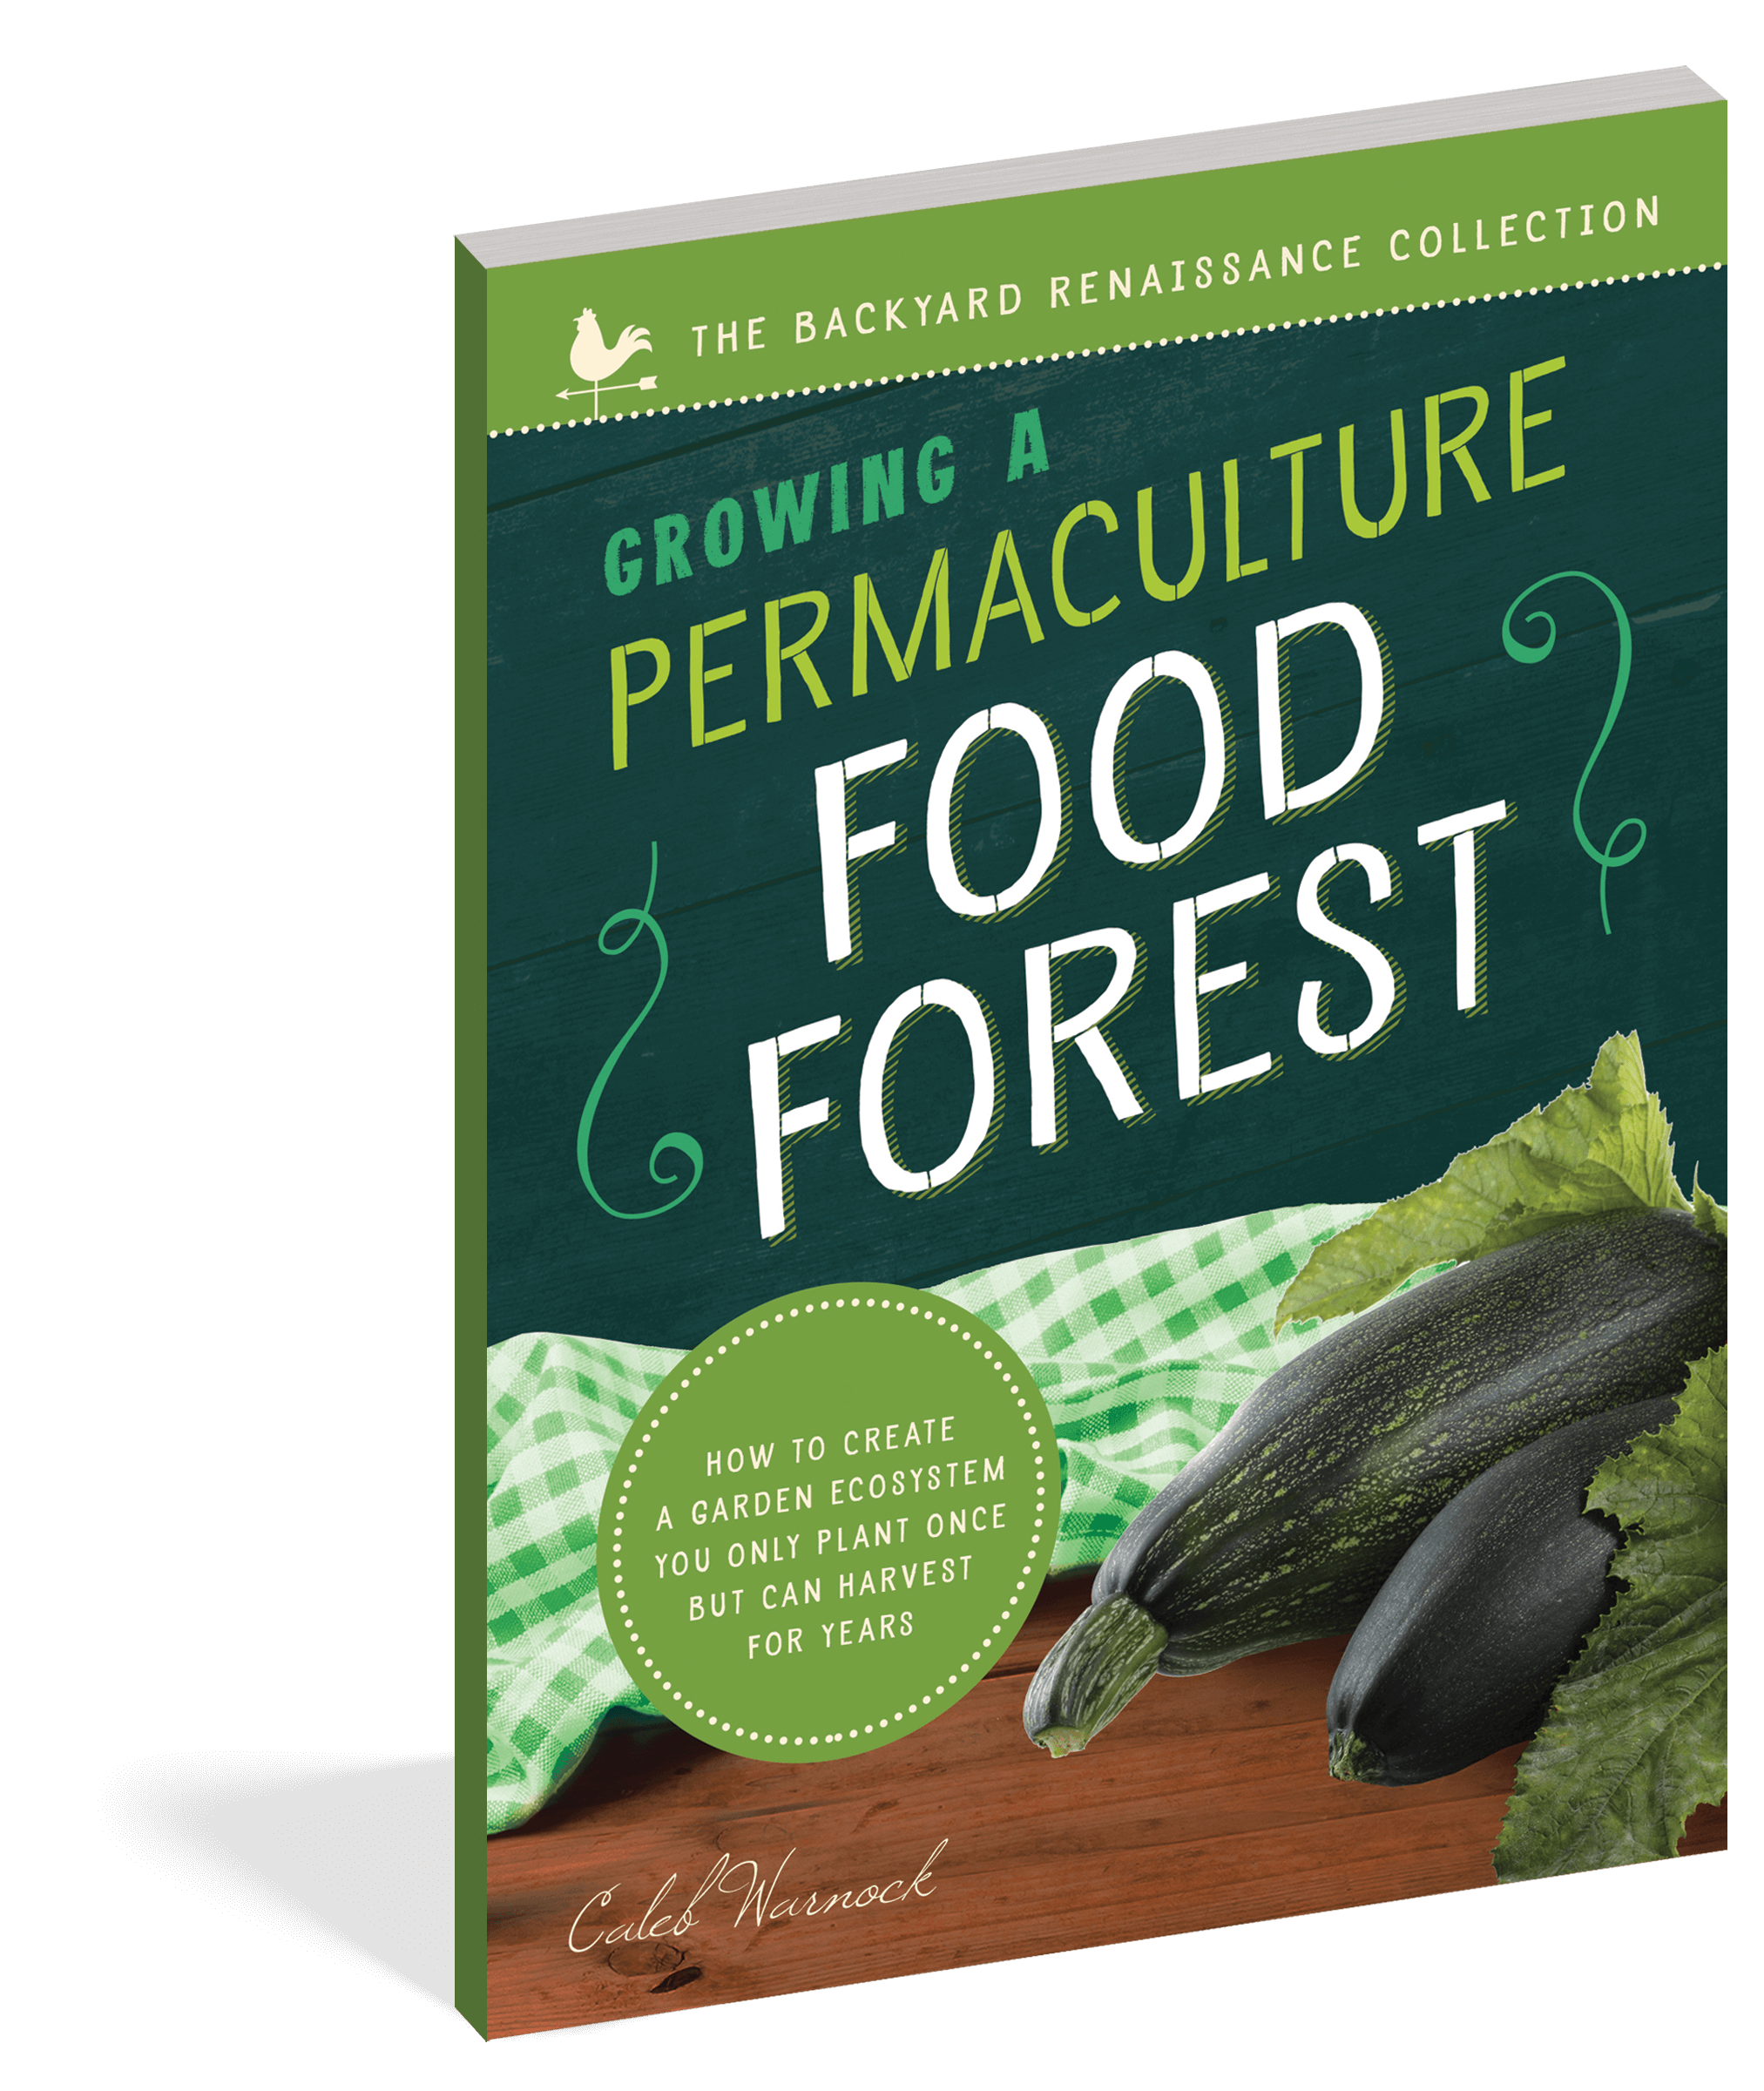 The cover of the book Growing a Permaculture Food Forest.